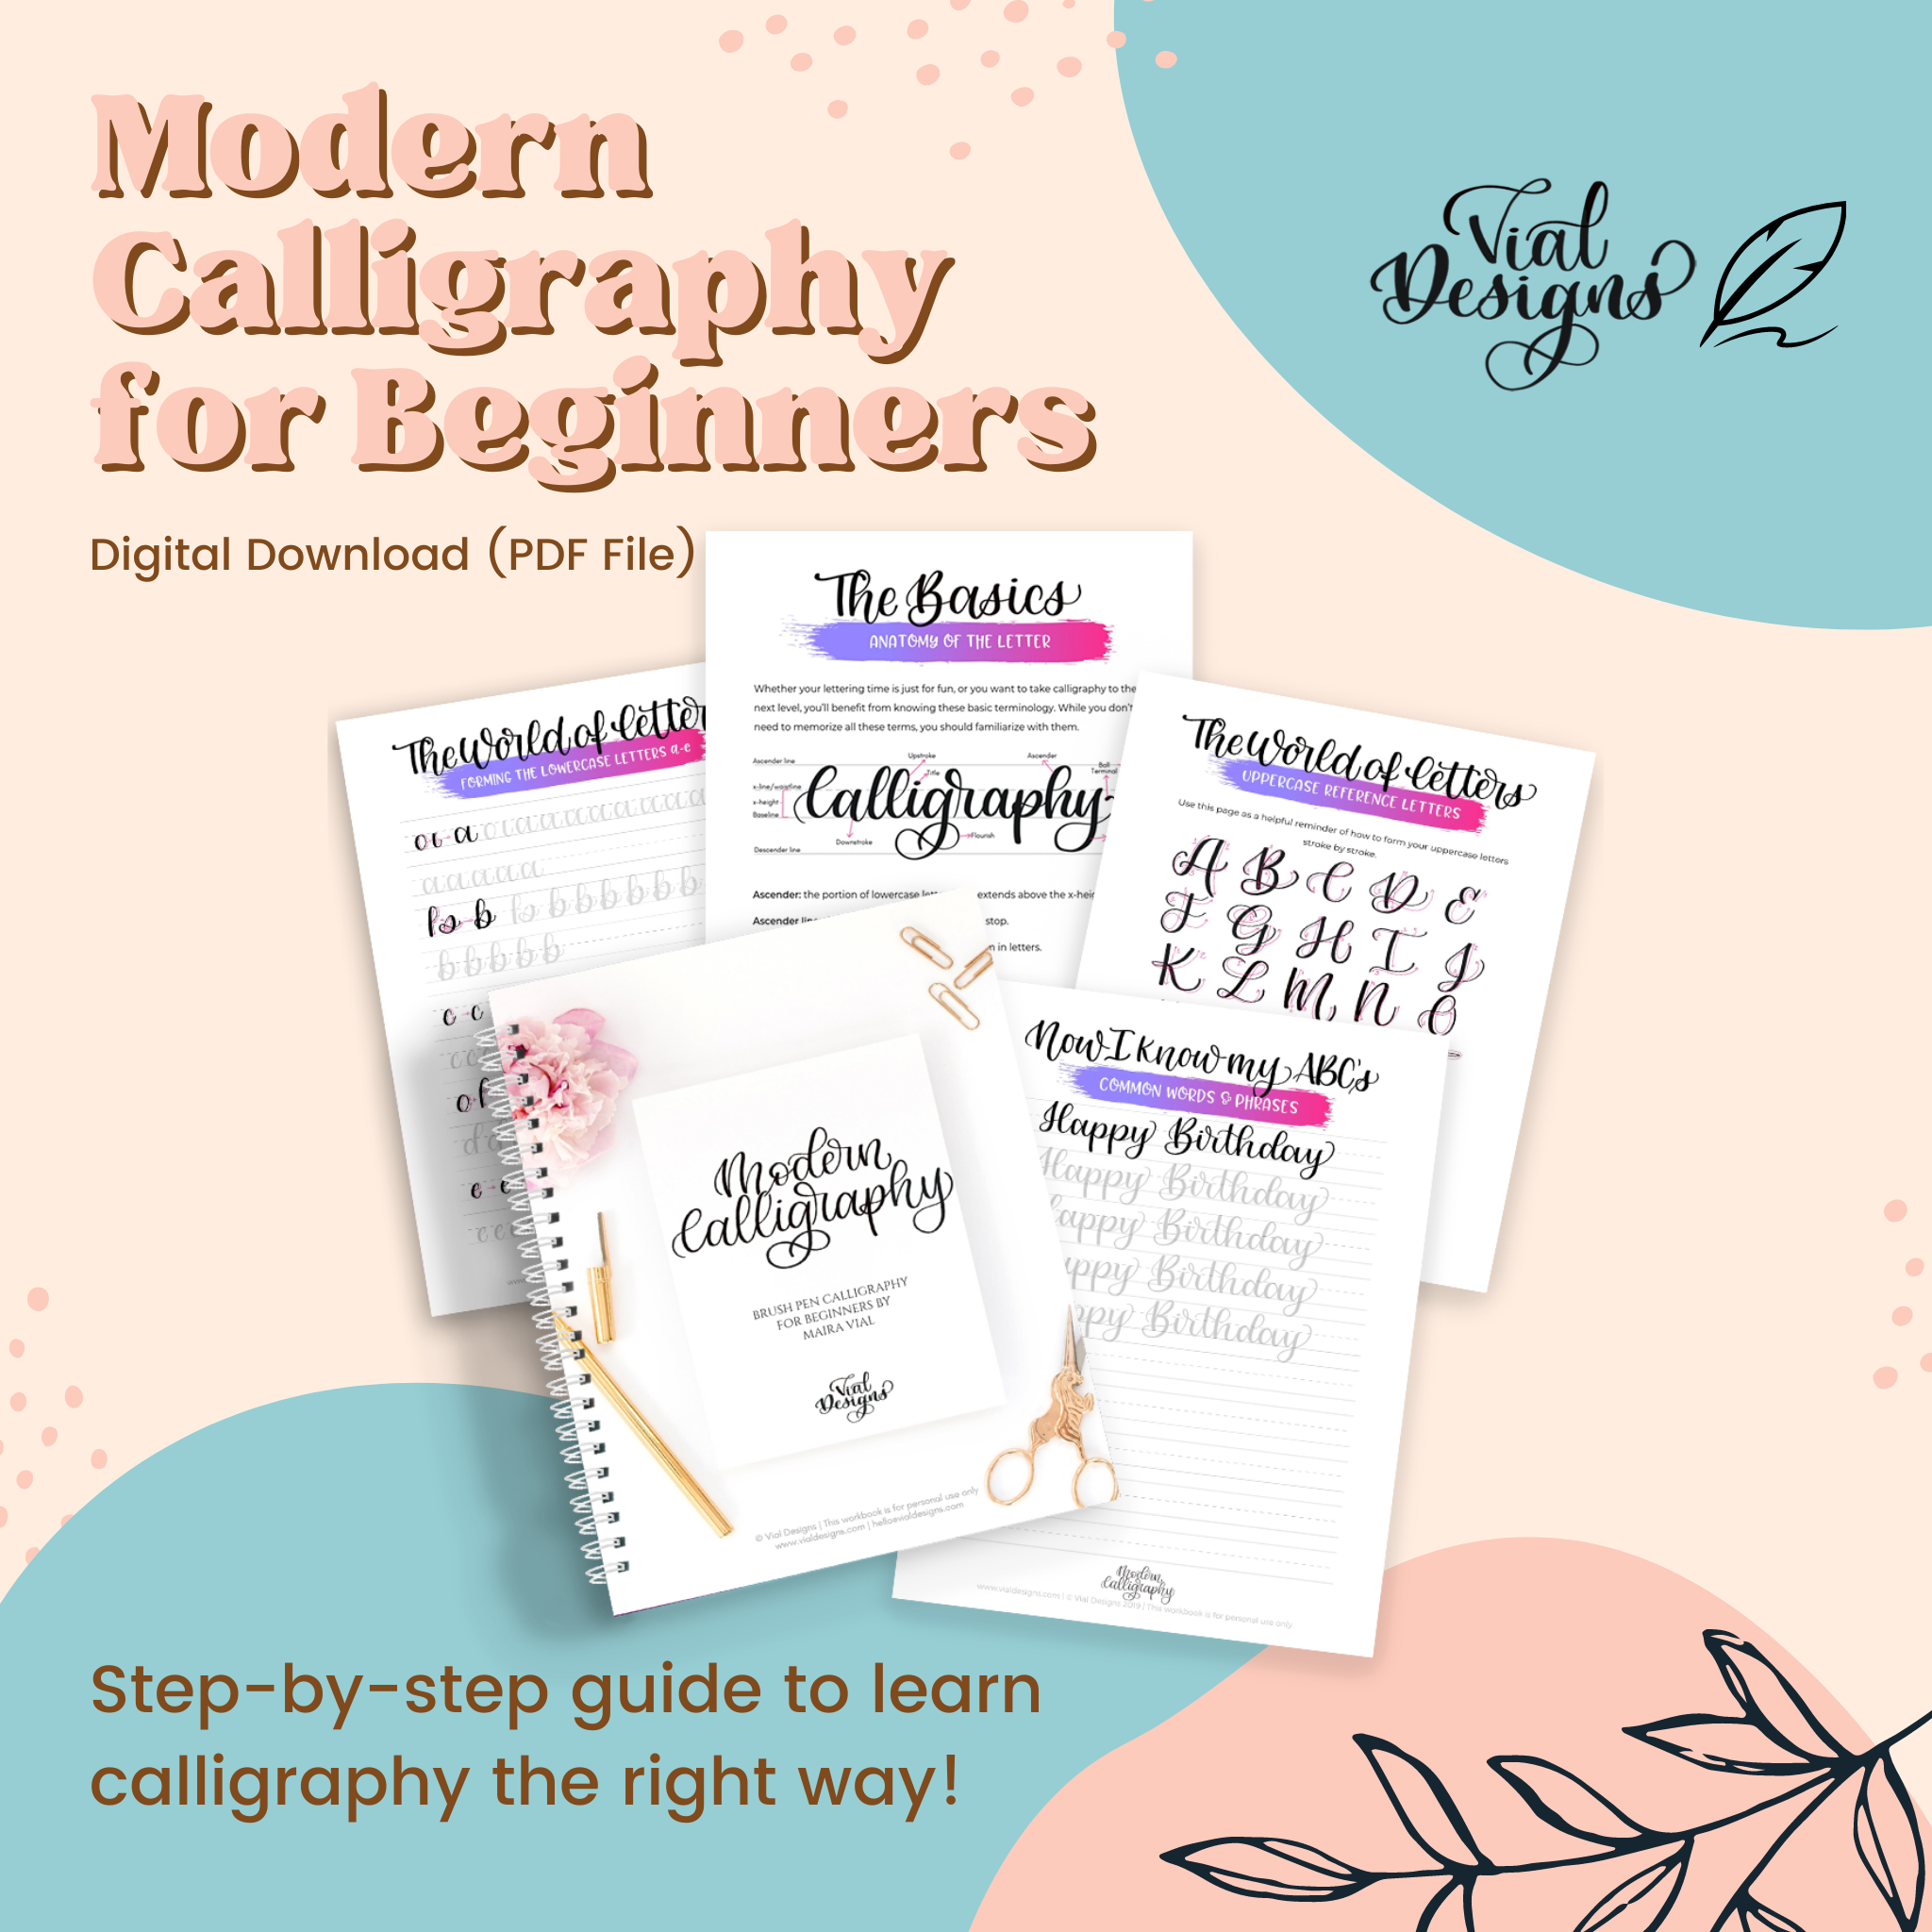 The Lettering Workbook for Small Tip Brush Pen: A Simple Guide to Hand Lettering and Modern Calligraphy [Book]